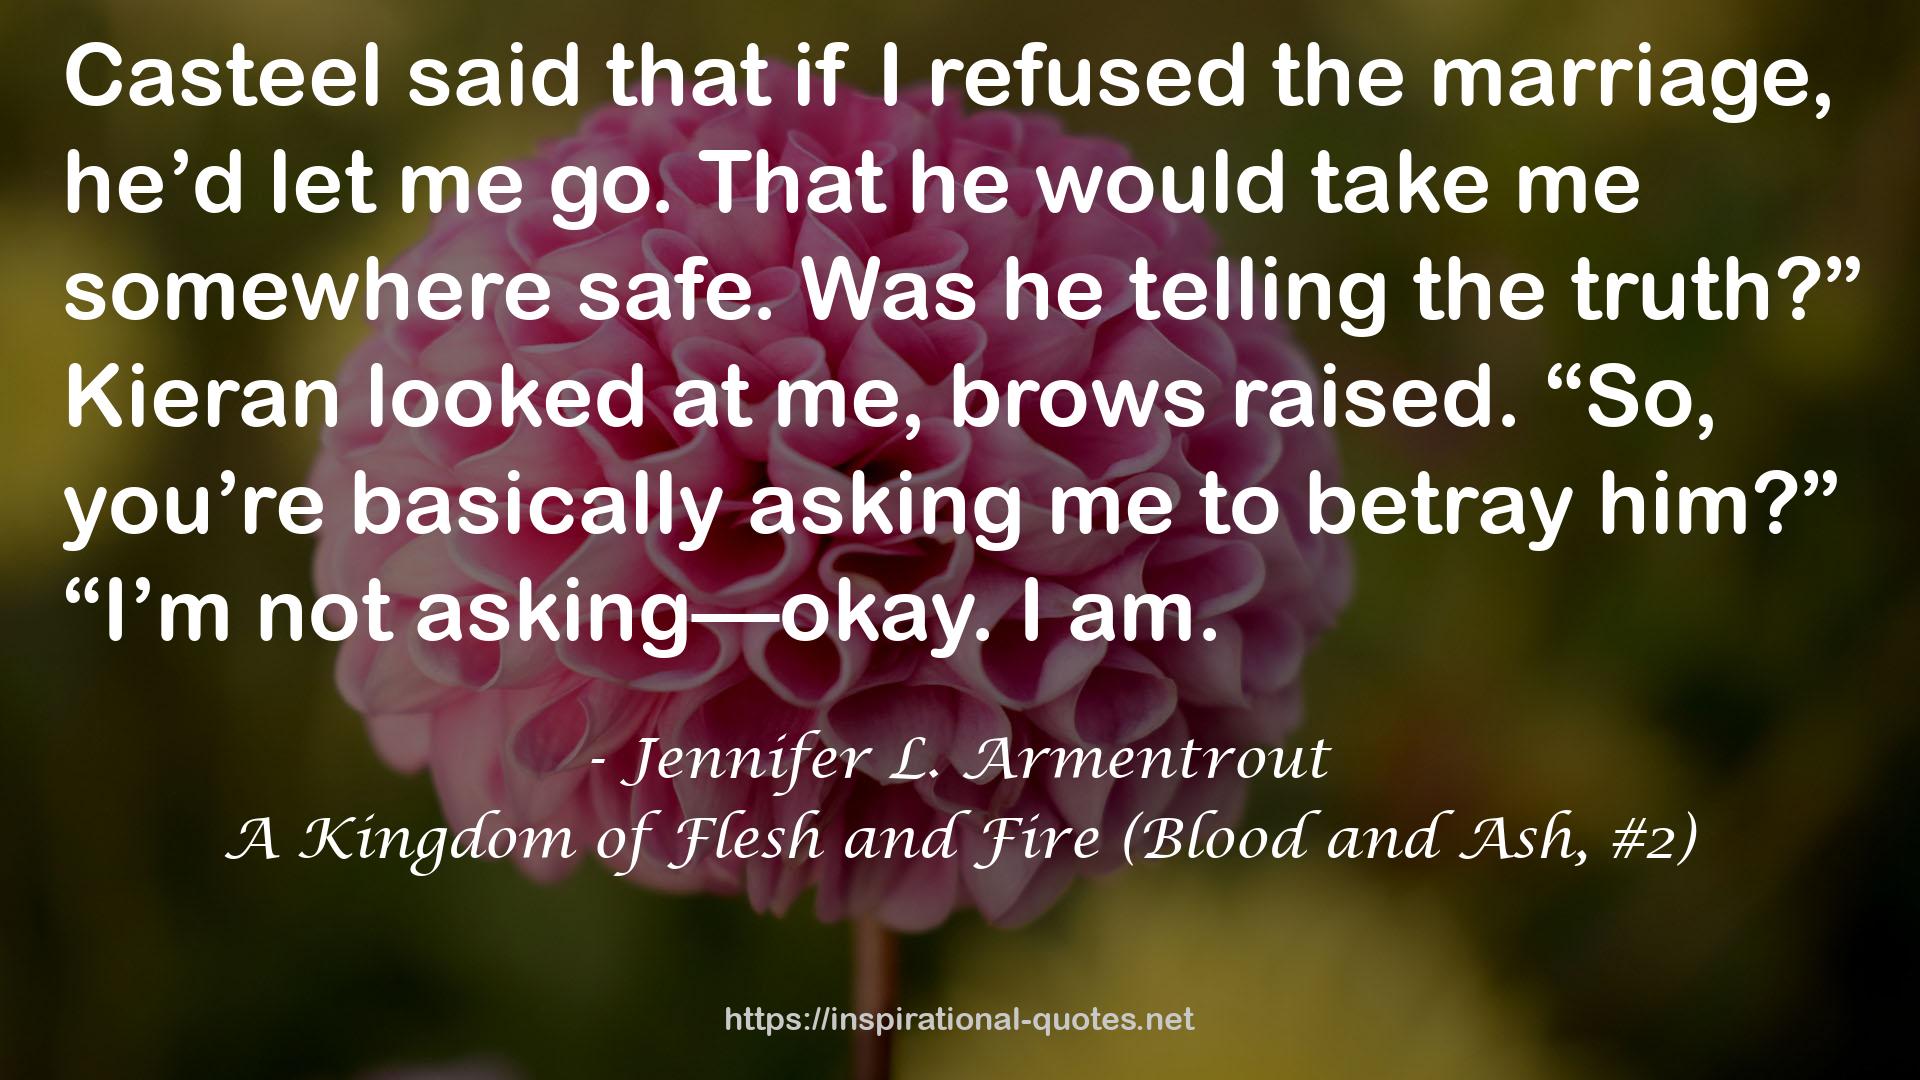 A Kingdom of Flesh and Fire (Blood and Ash, #2) QUOTES